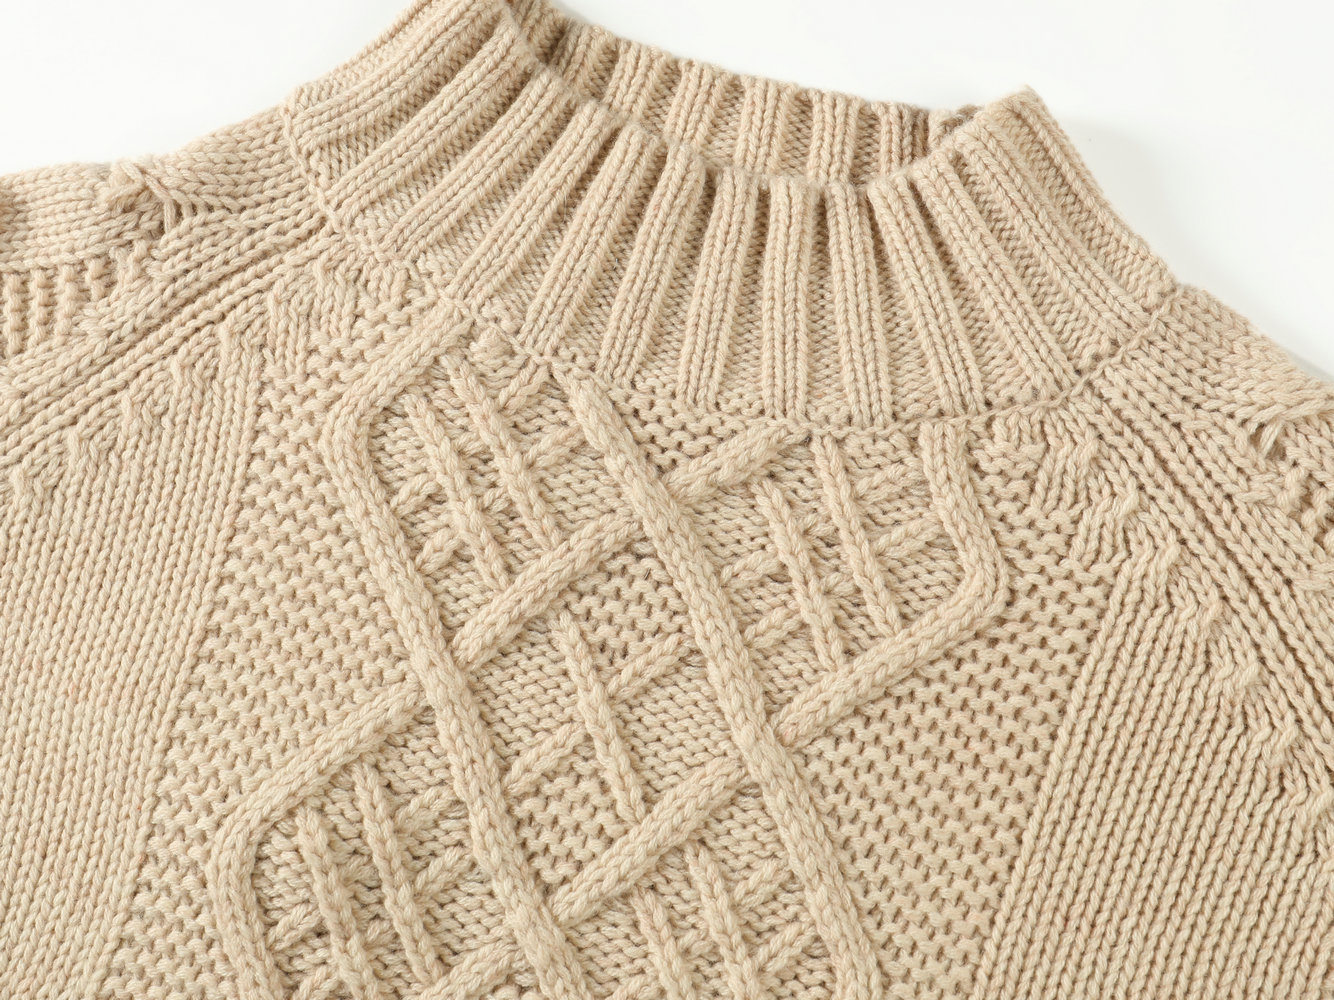 21140  WOMEN’S KNITTED JUMPER DIAMOND AND CABLE JACQUARD RAW BOTTOM EDGE MOQ 200PCS/COLOR